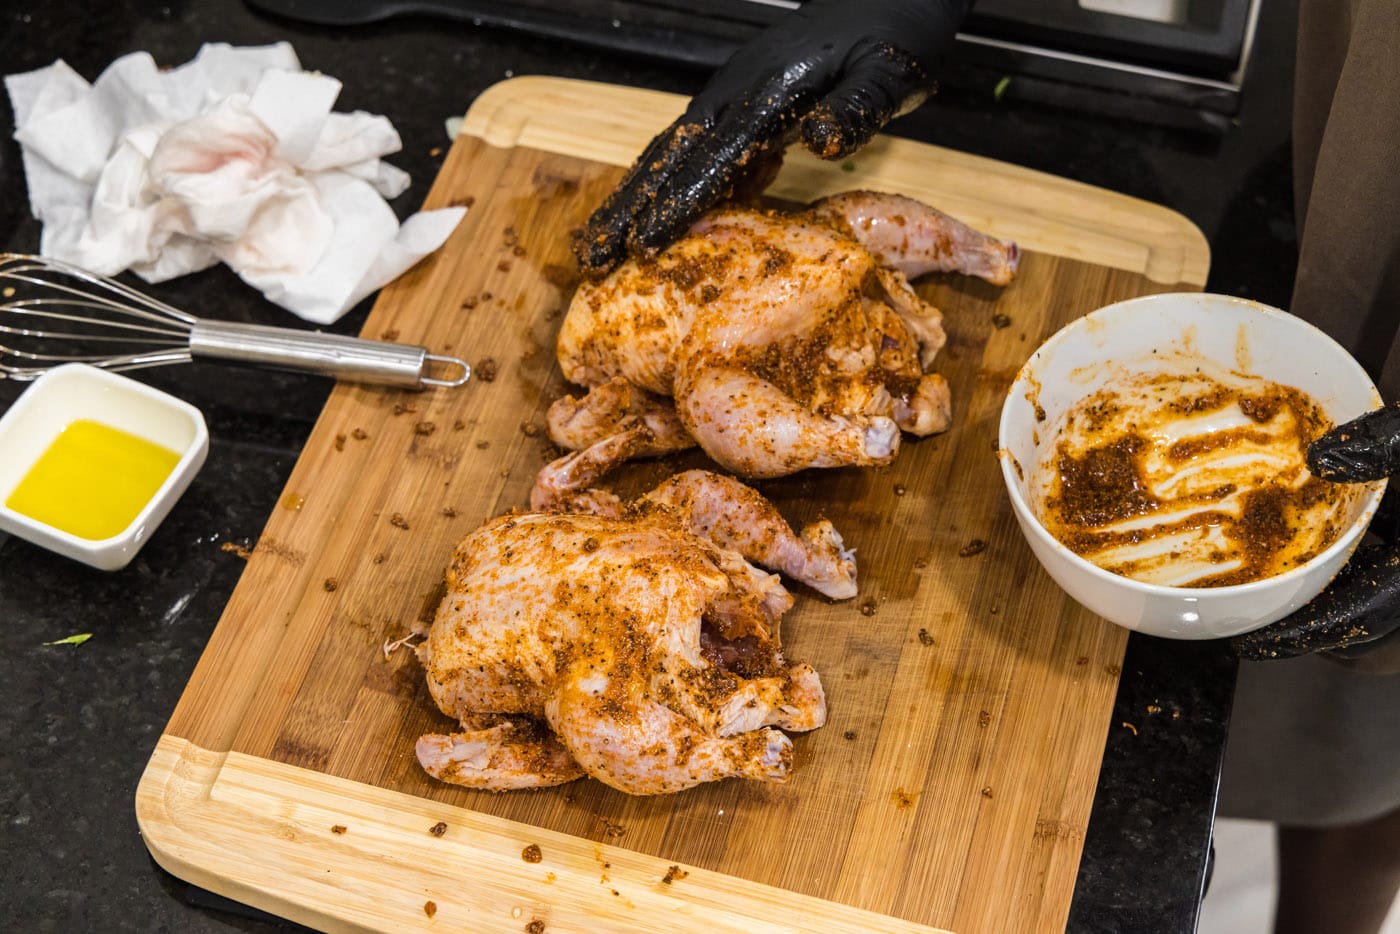 rubbing cornish hens in spices and seasonings